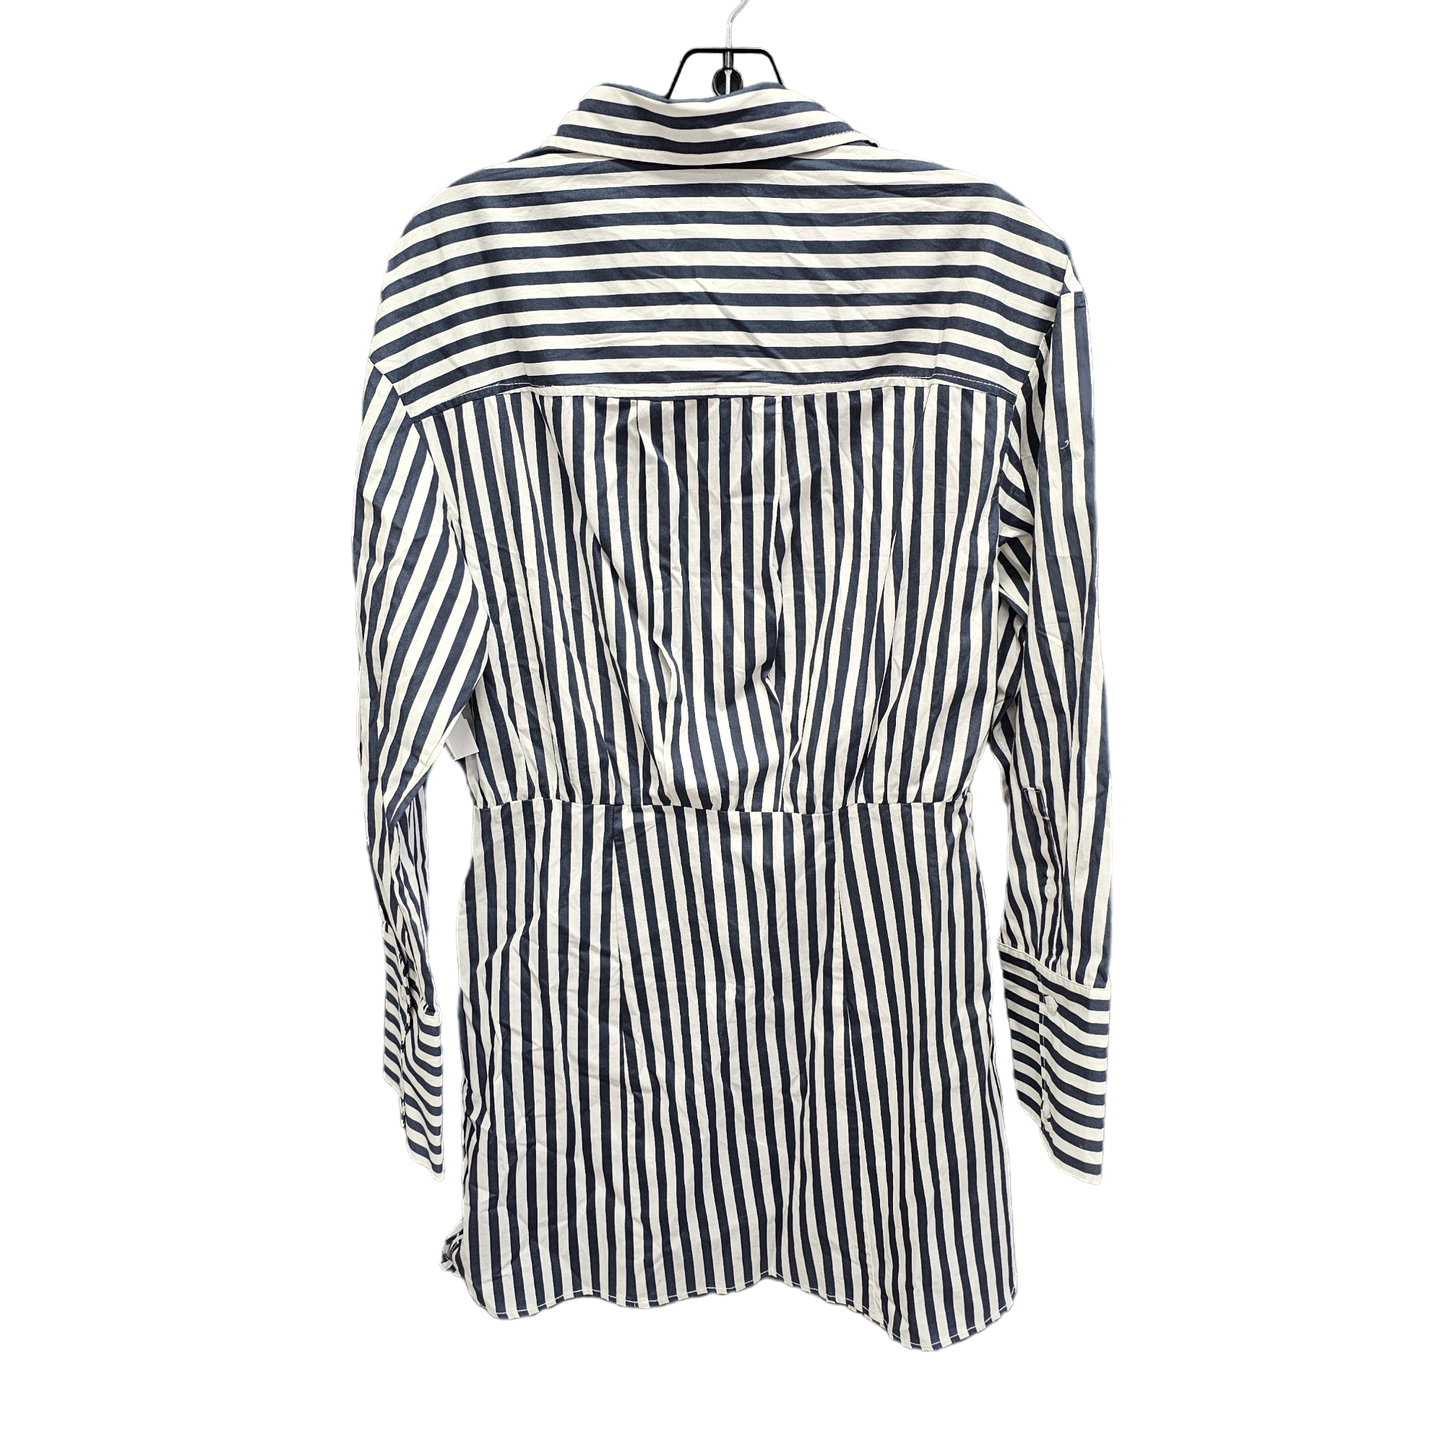 Striped Pattern Dress Casual Short H&m, Size S